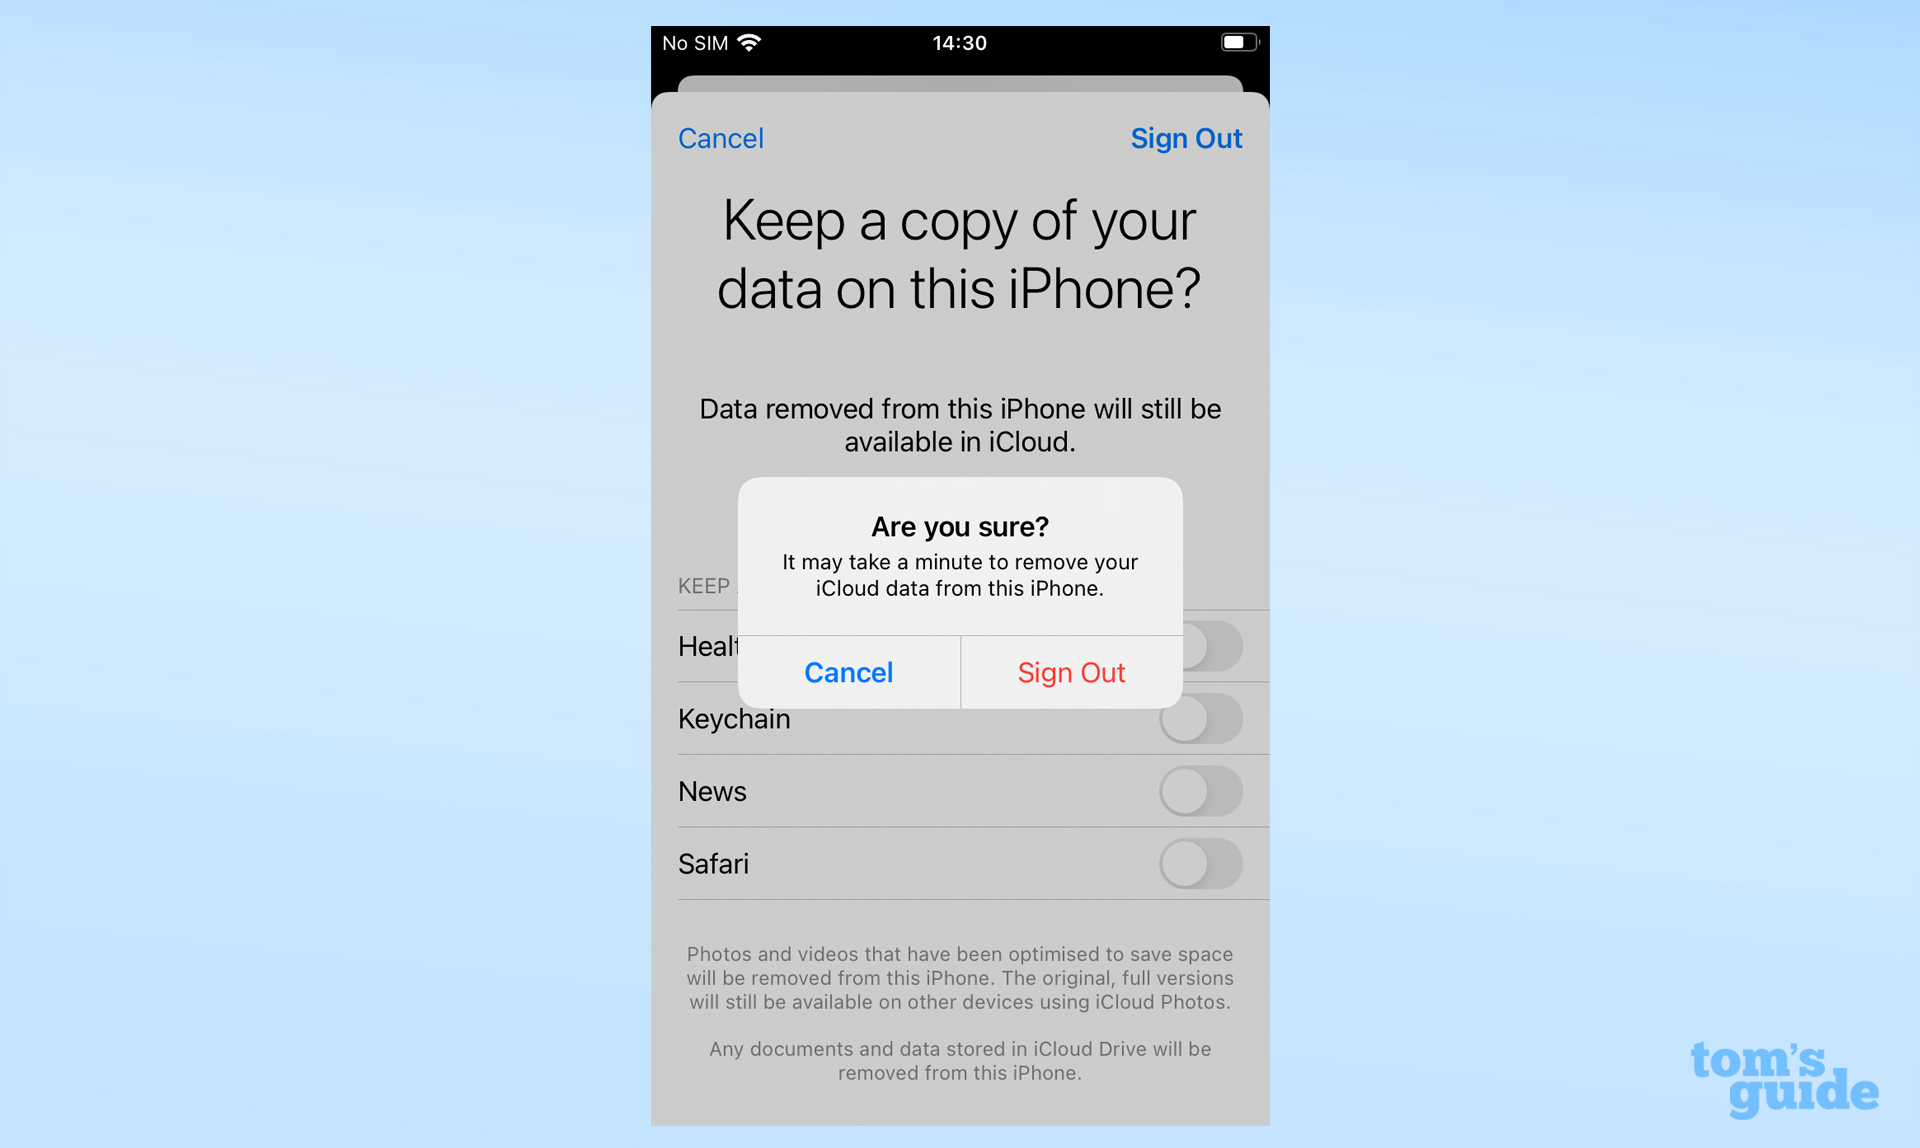 A screenshot of the iOS settings app, showing the final sign out pop-up from signing out of Apple ID